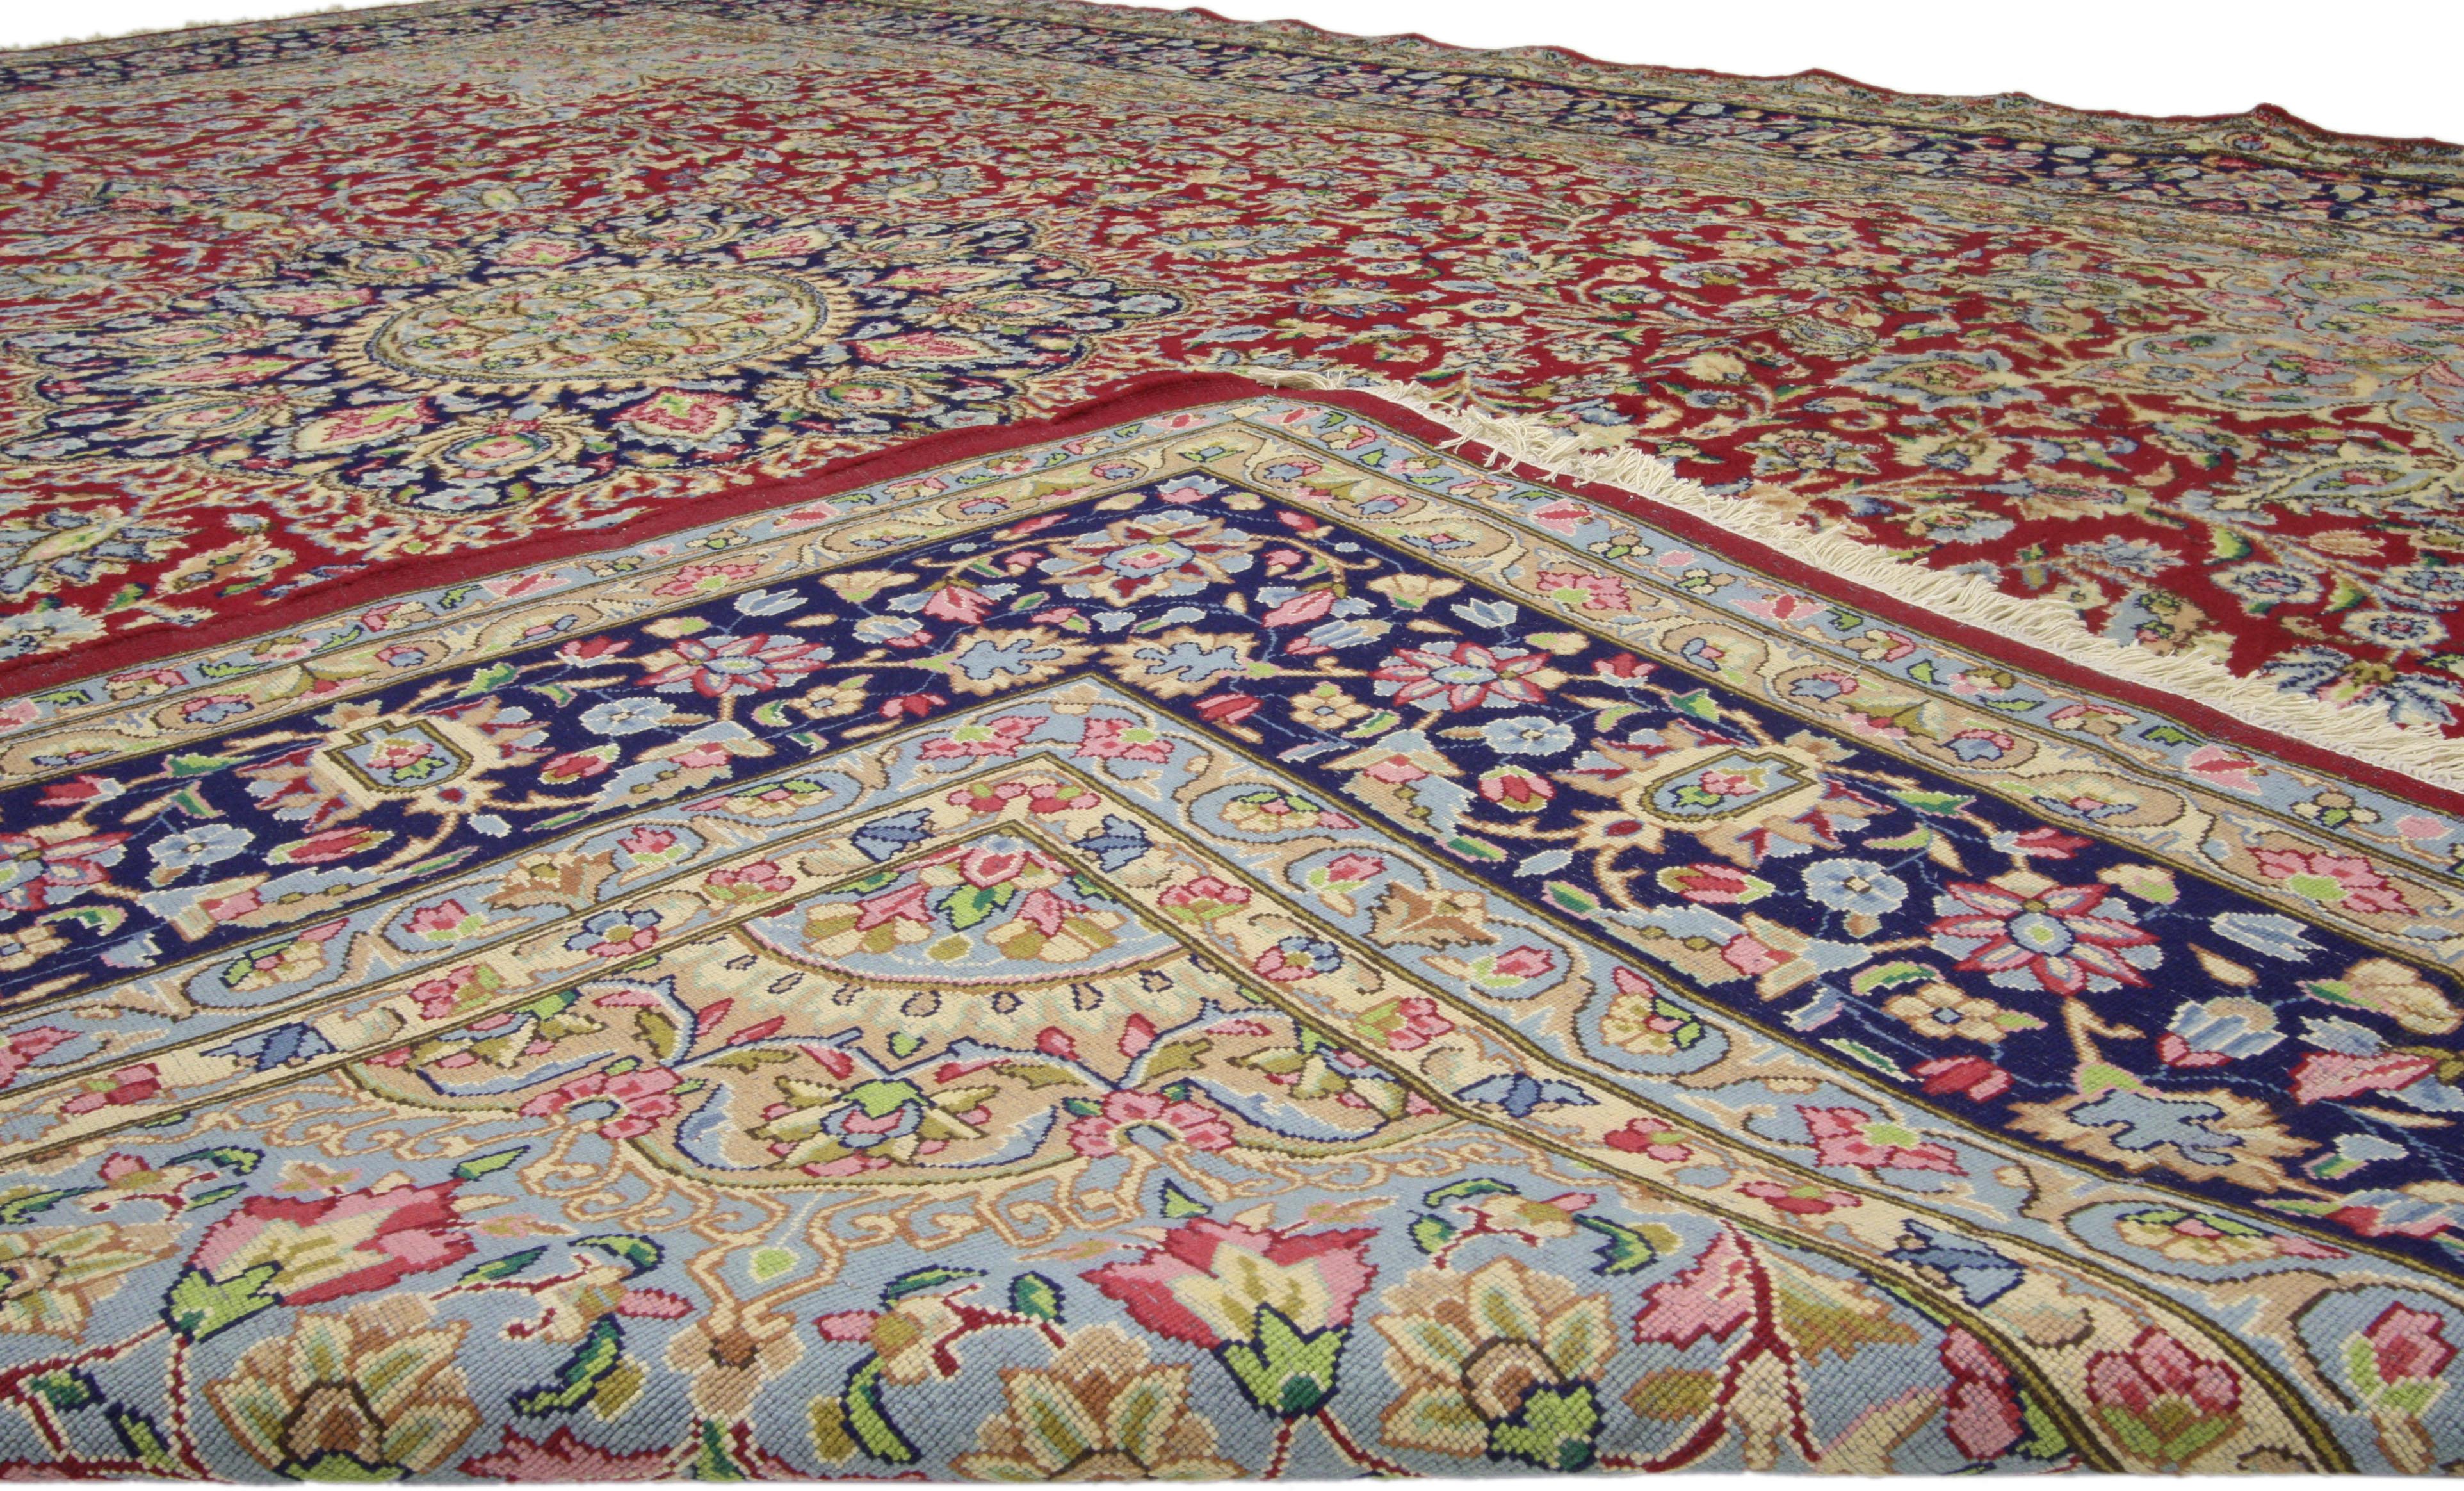 20th Century Vintage Persian Kerman Rug with Old World French Victorian Style, Kirman Rug